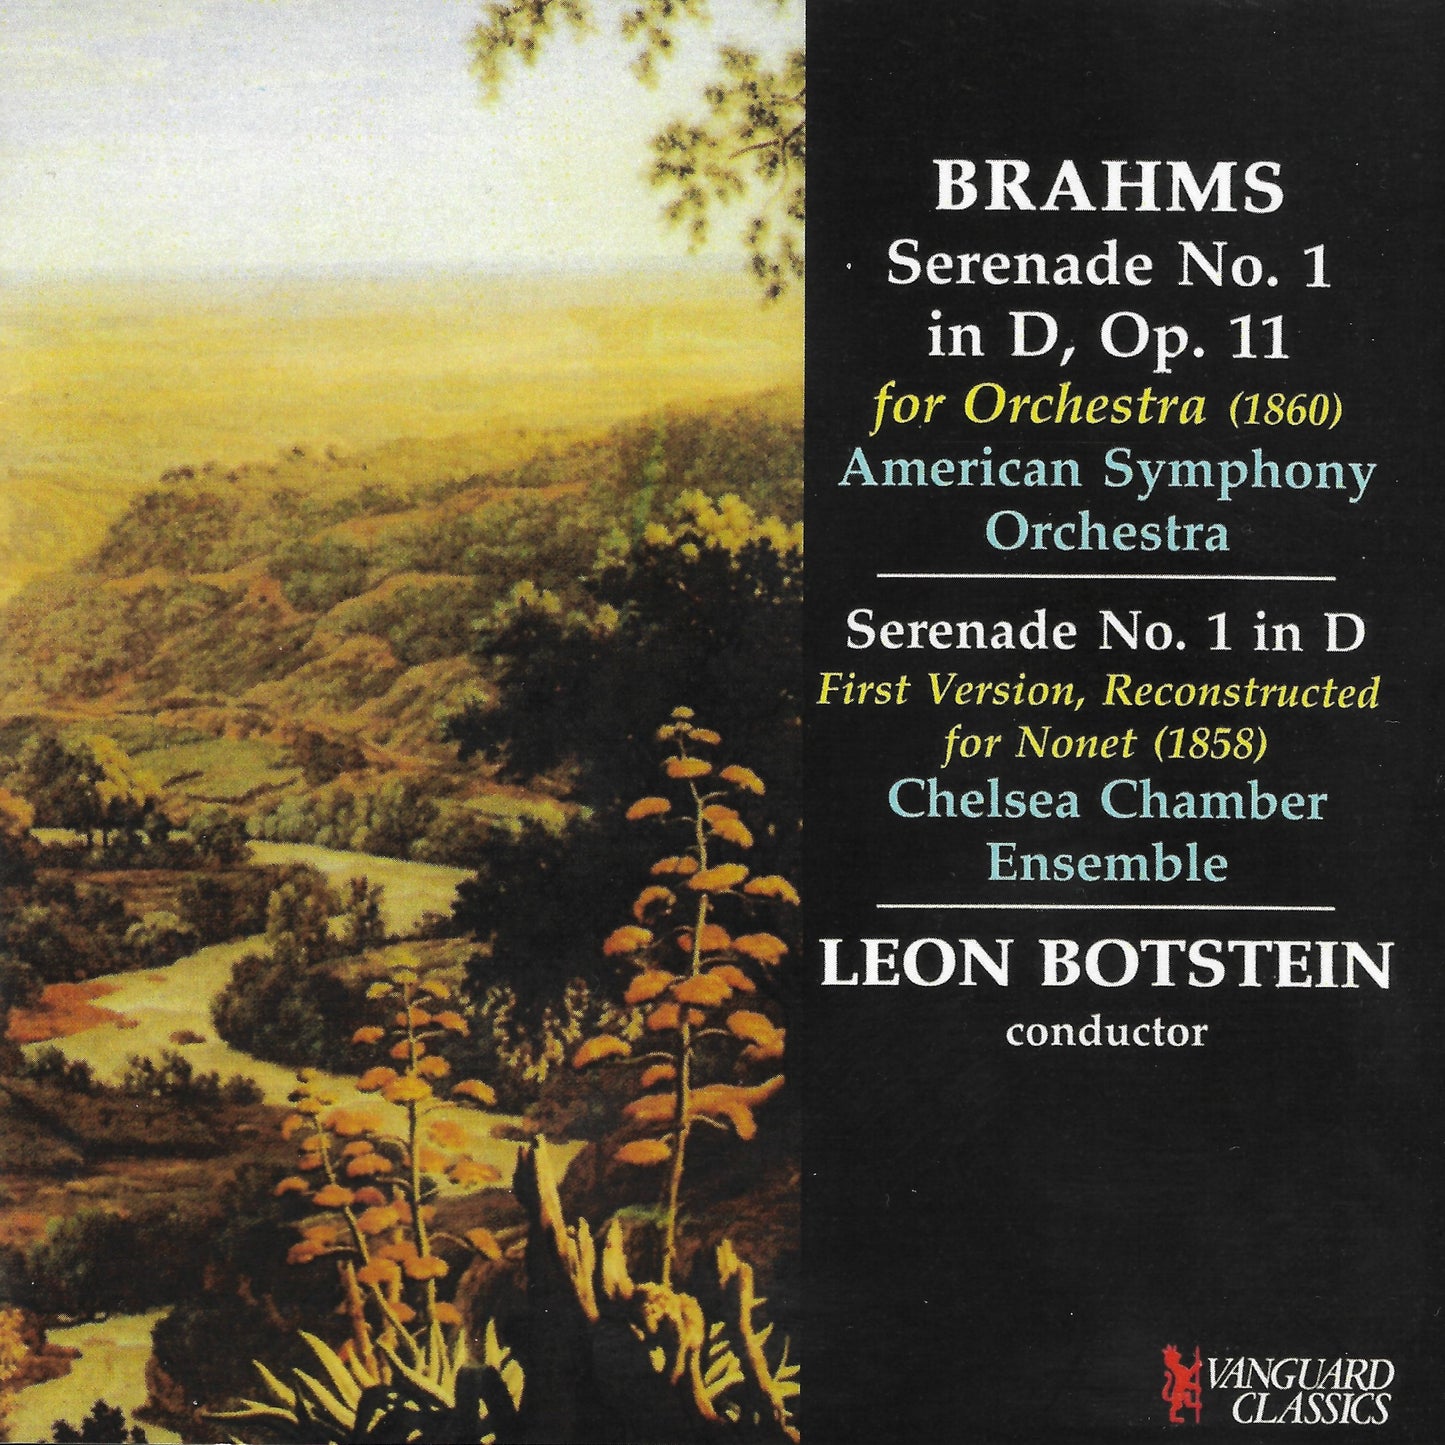 BRAHMS: Serenade No. 1, Serenade Reconstructed from Nonet - Leon Botstein, Chelsea Chamber Orchestra, American Symphony Orchestra (DIGITAL DOWNLOAD)